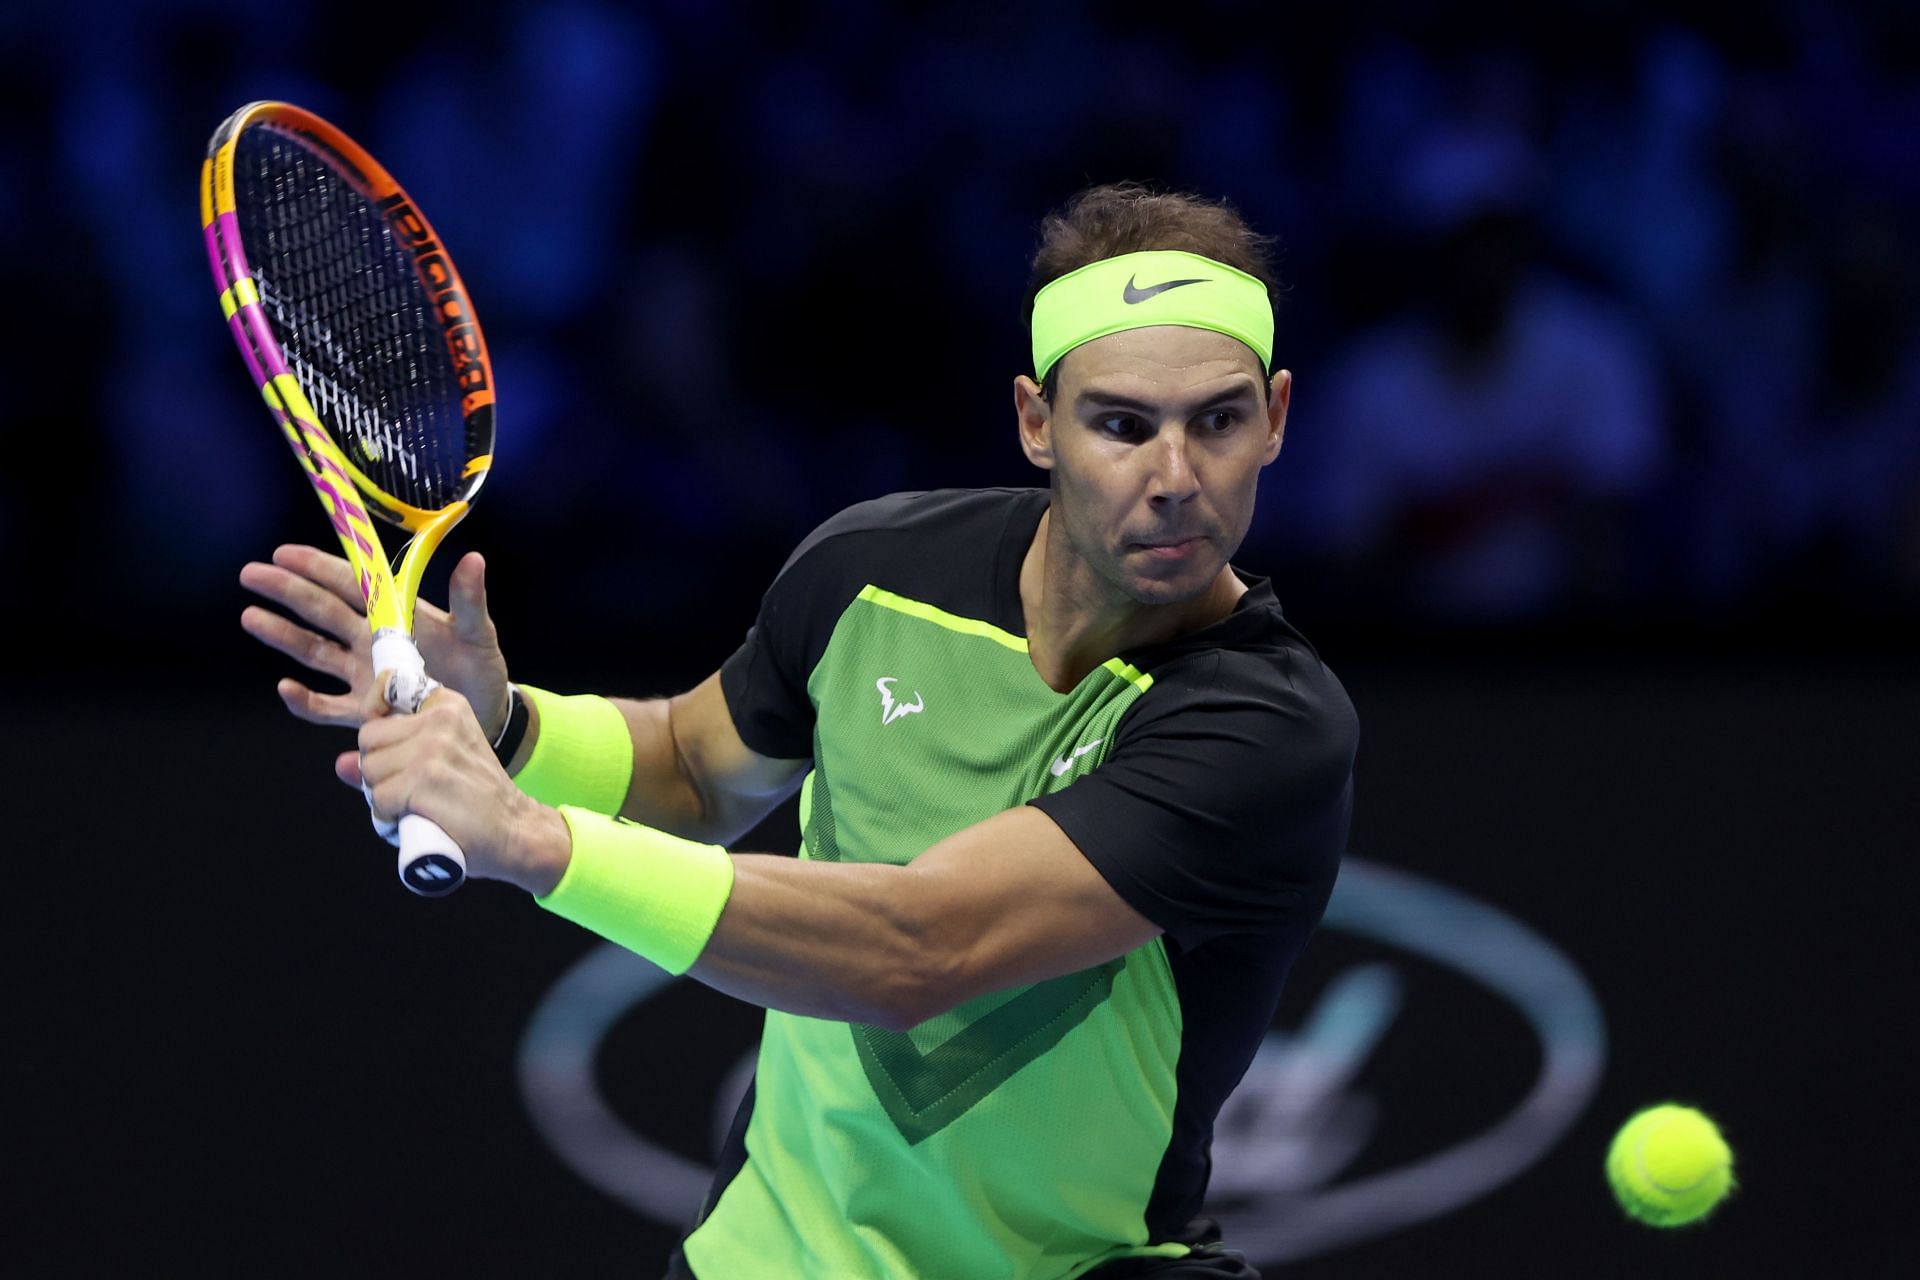 Rafael Nadal is the defending champion at the 2023 Australian Open